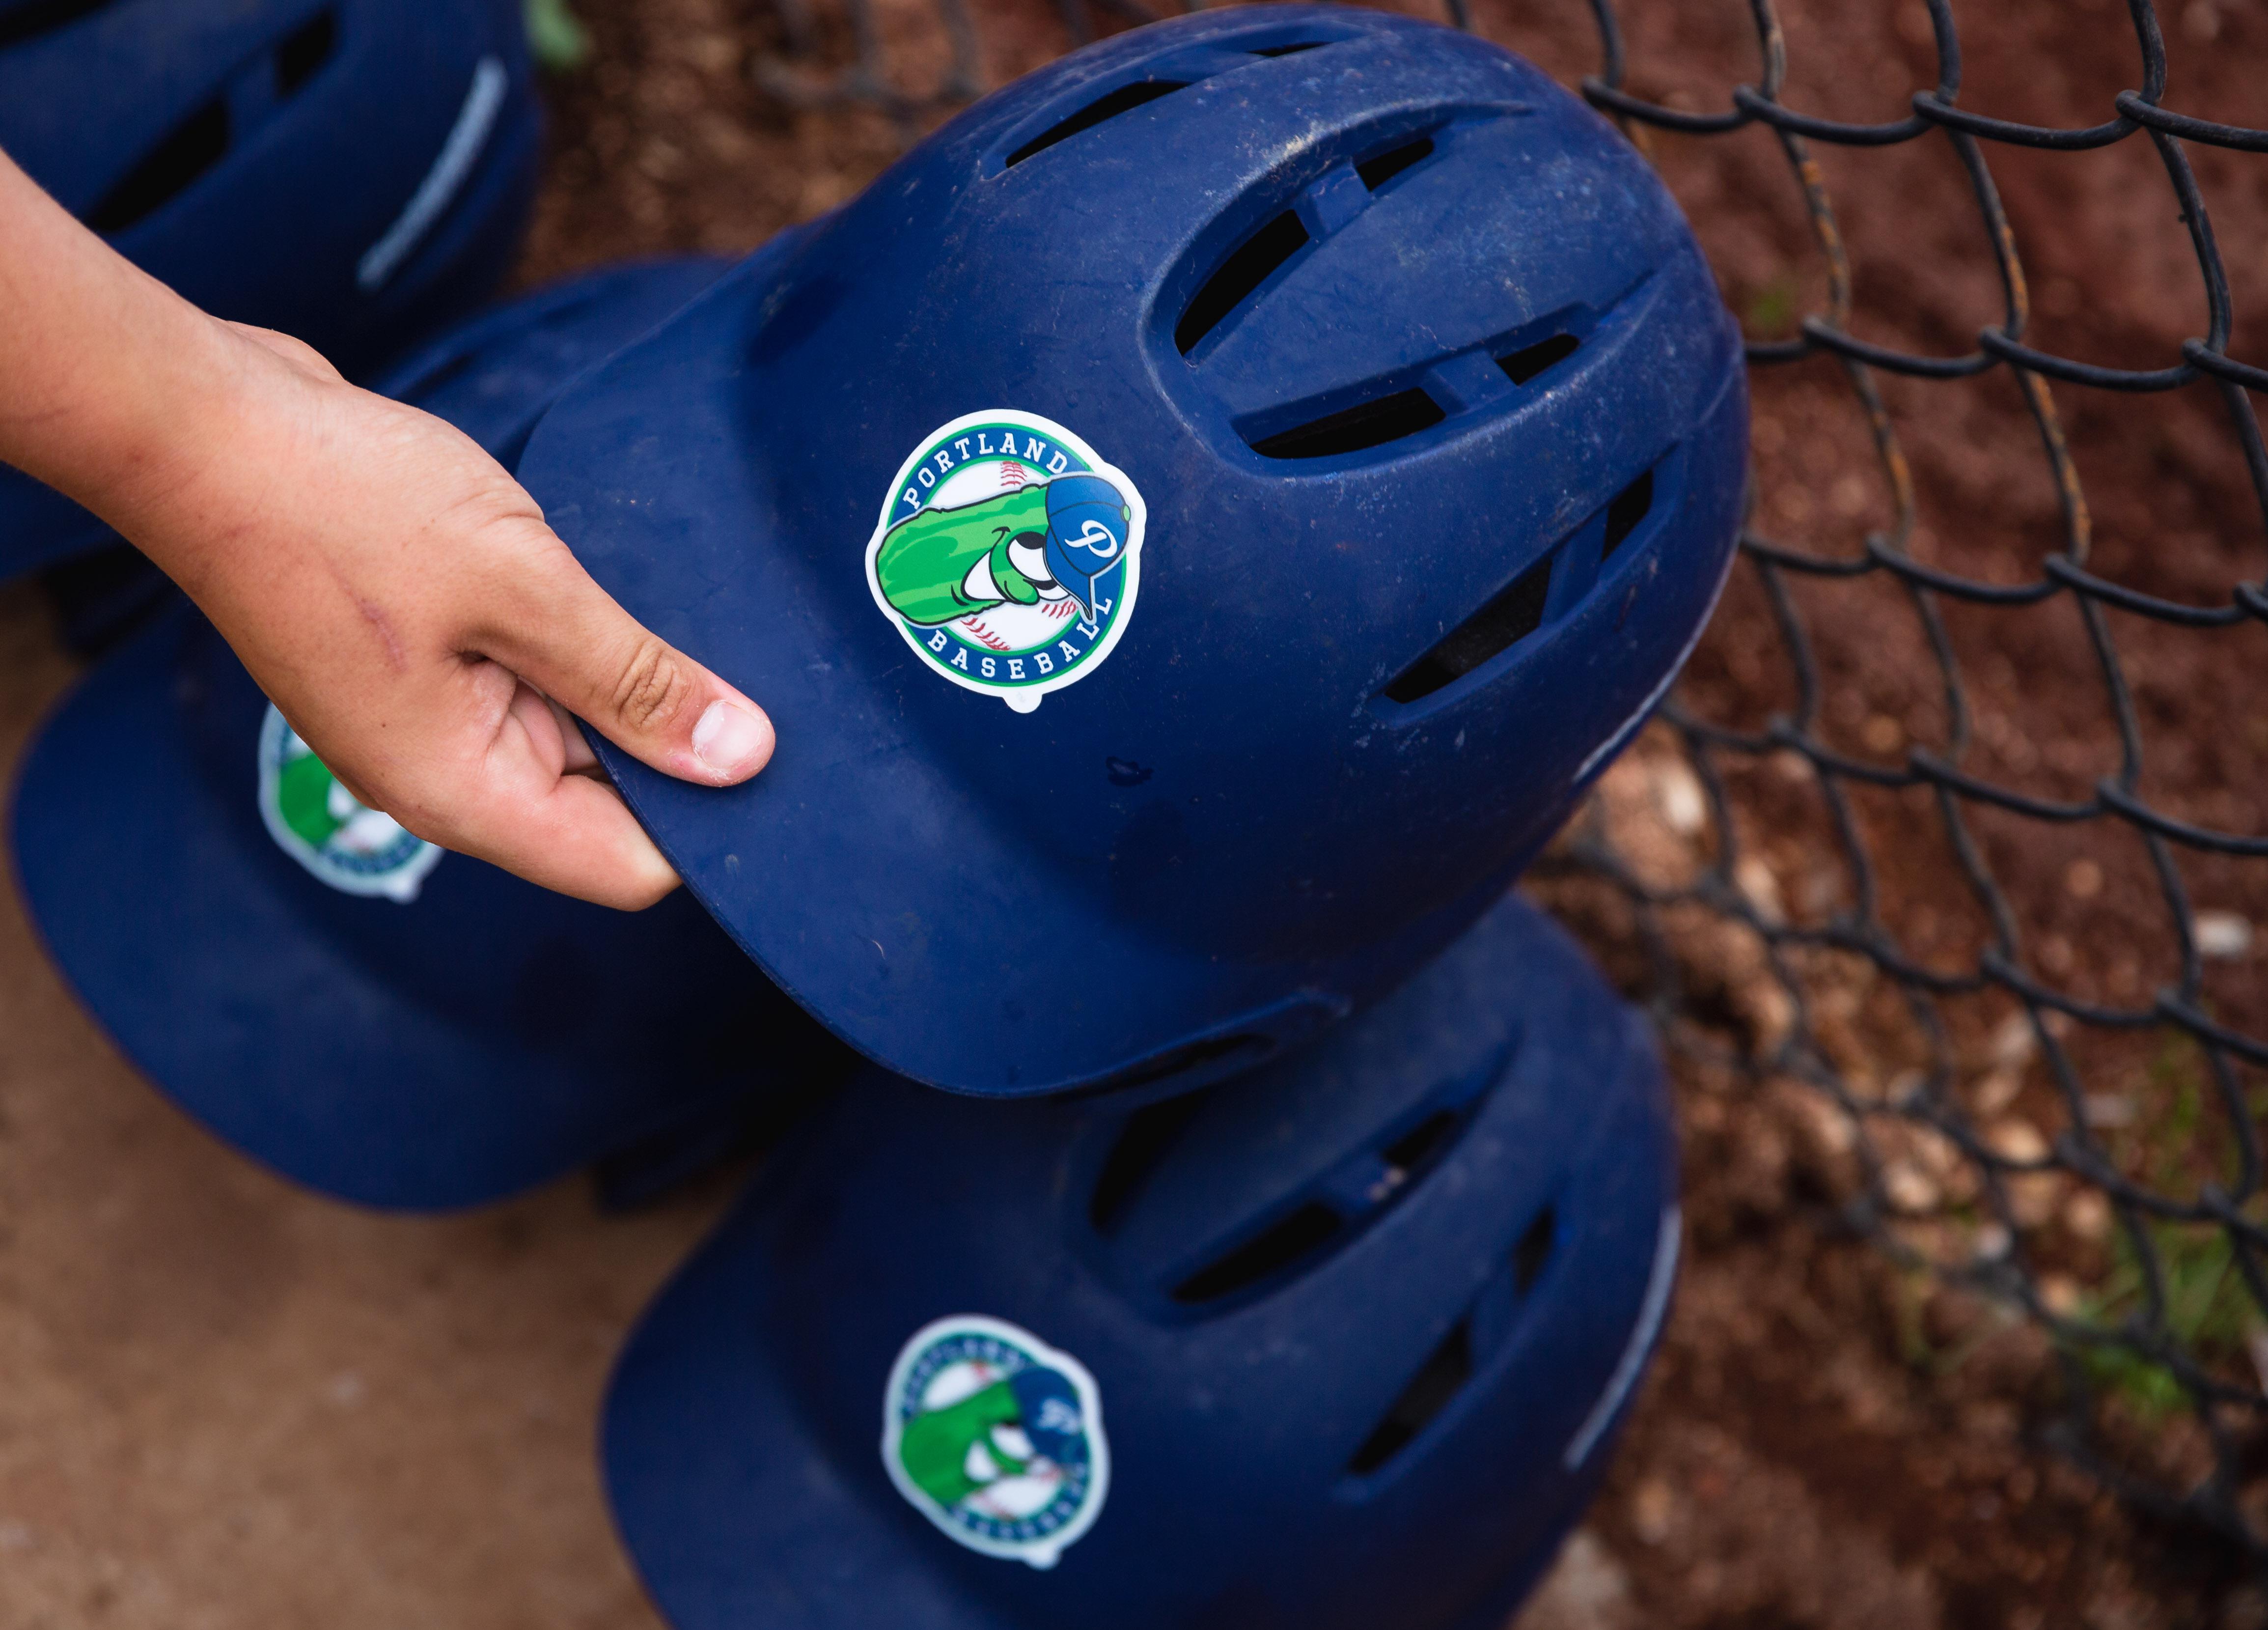 Portland Pickles helmets at a game July 10, 2019.